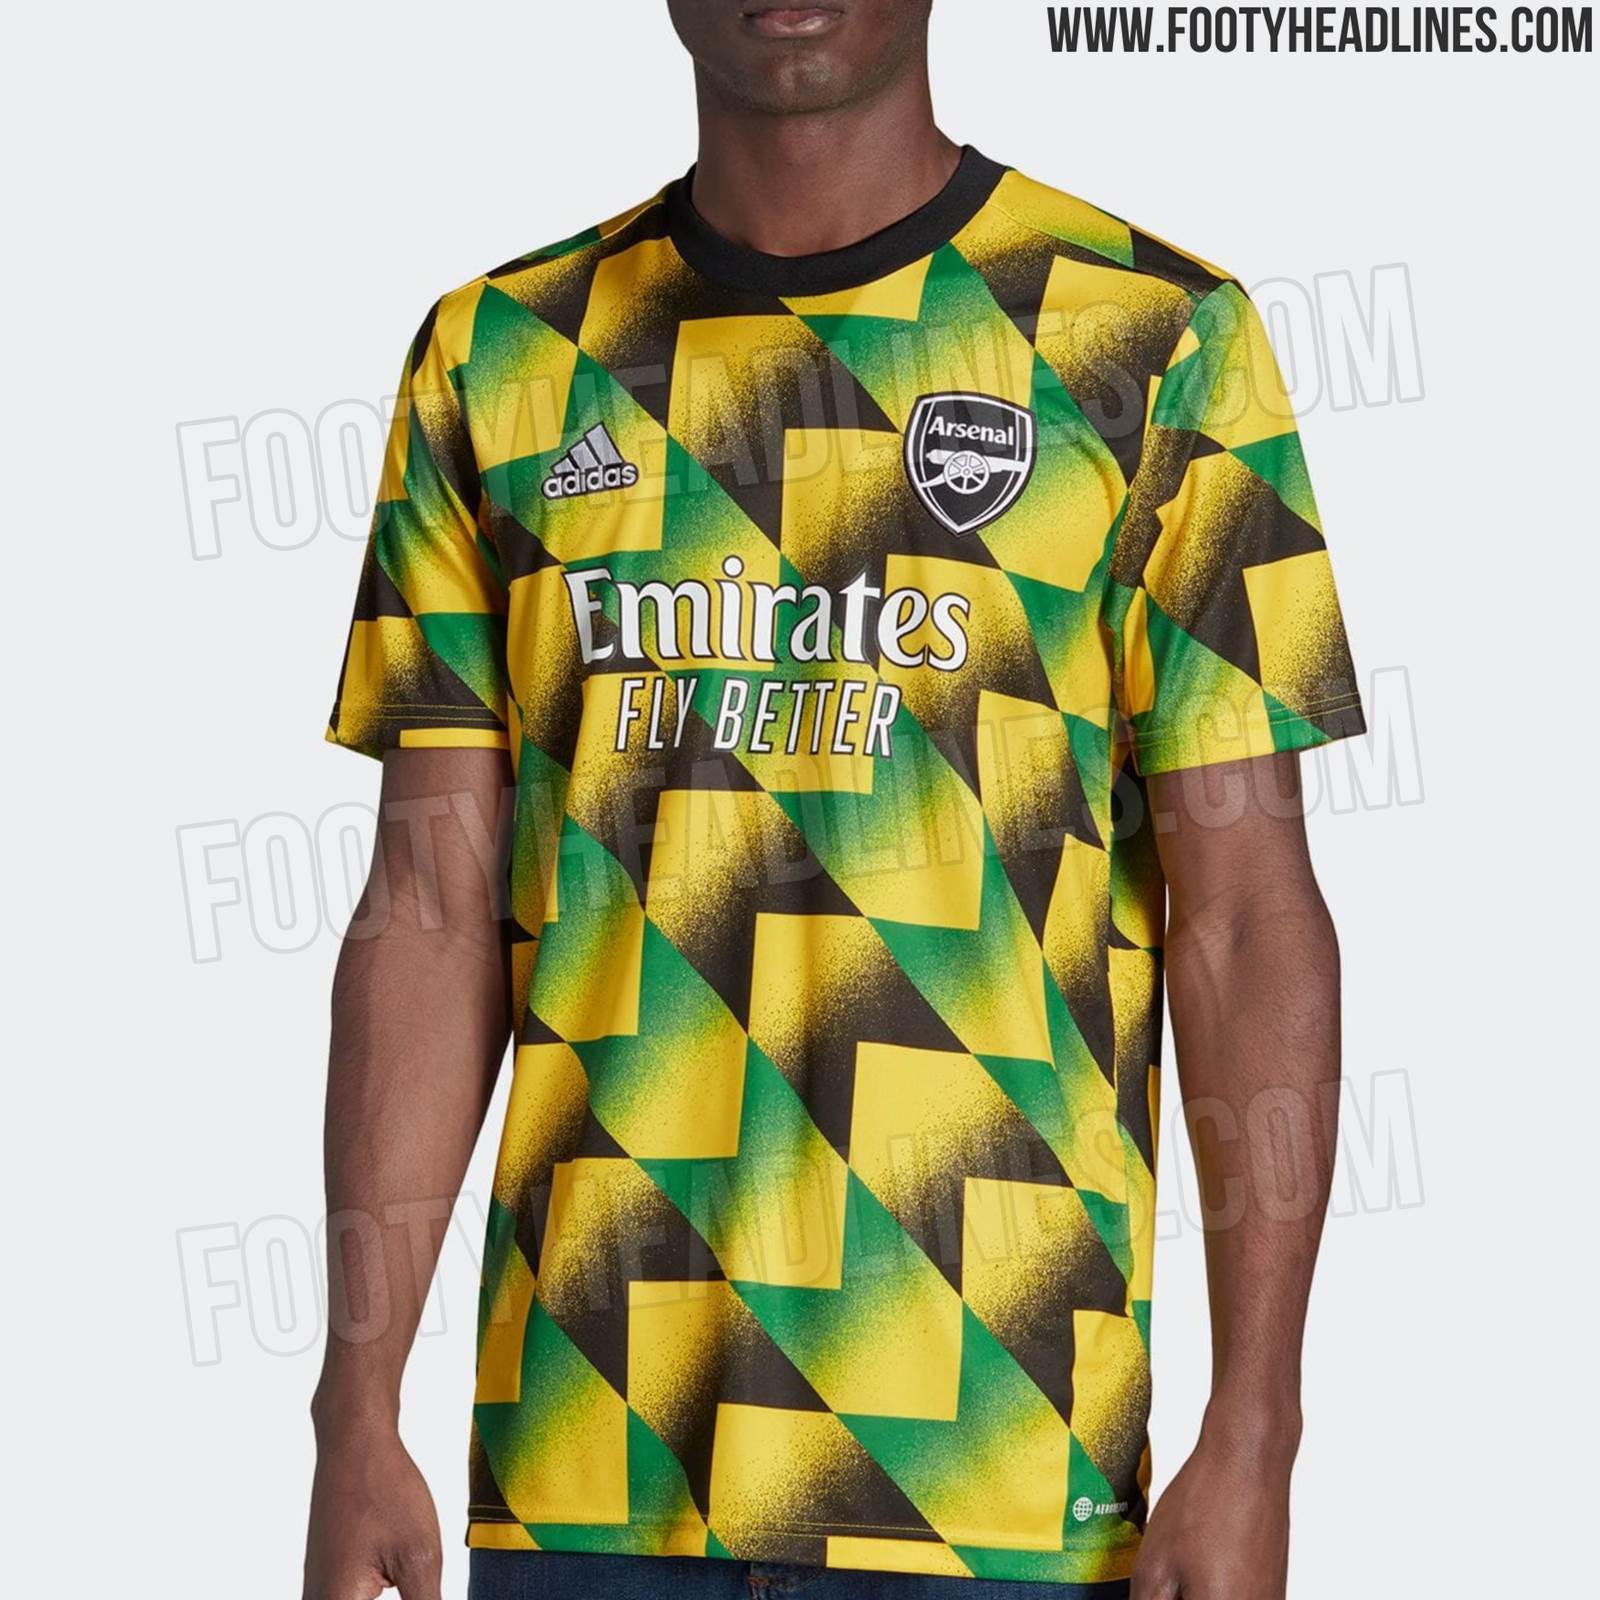 Exclusive: Outstanding Arsenal 22-23 Pre-Match Shirt Leaked - Footy Headlines